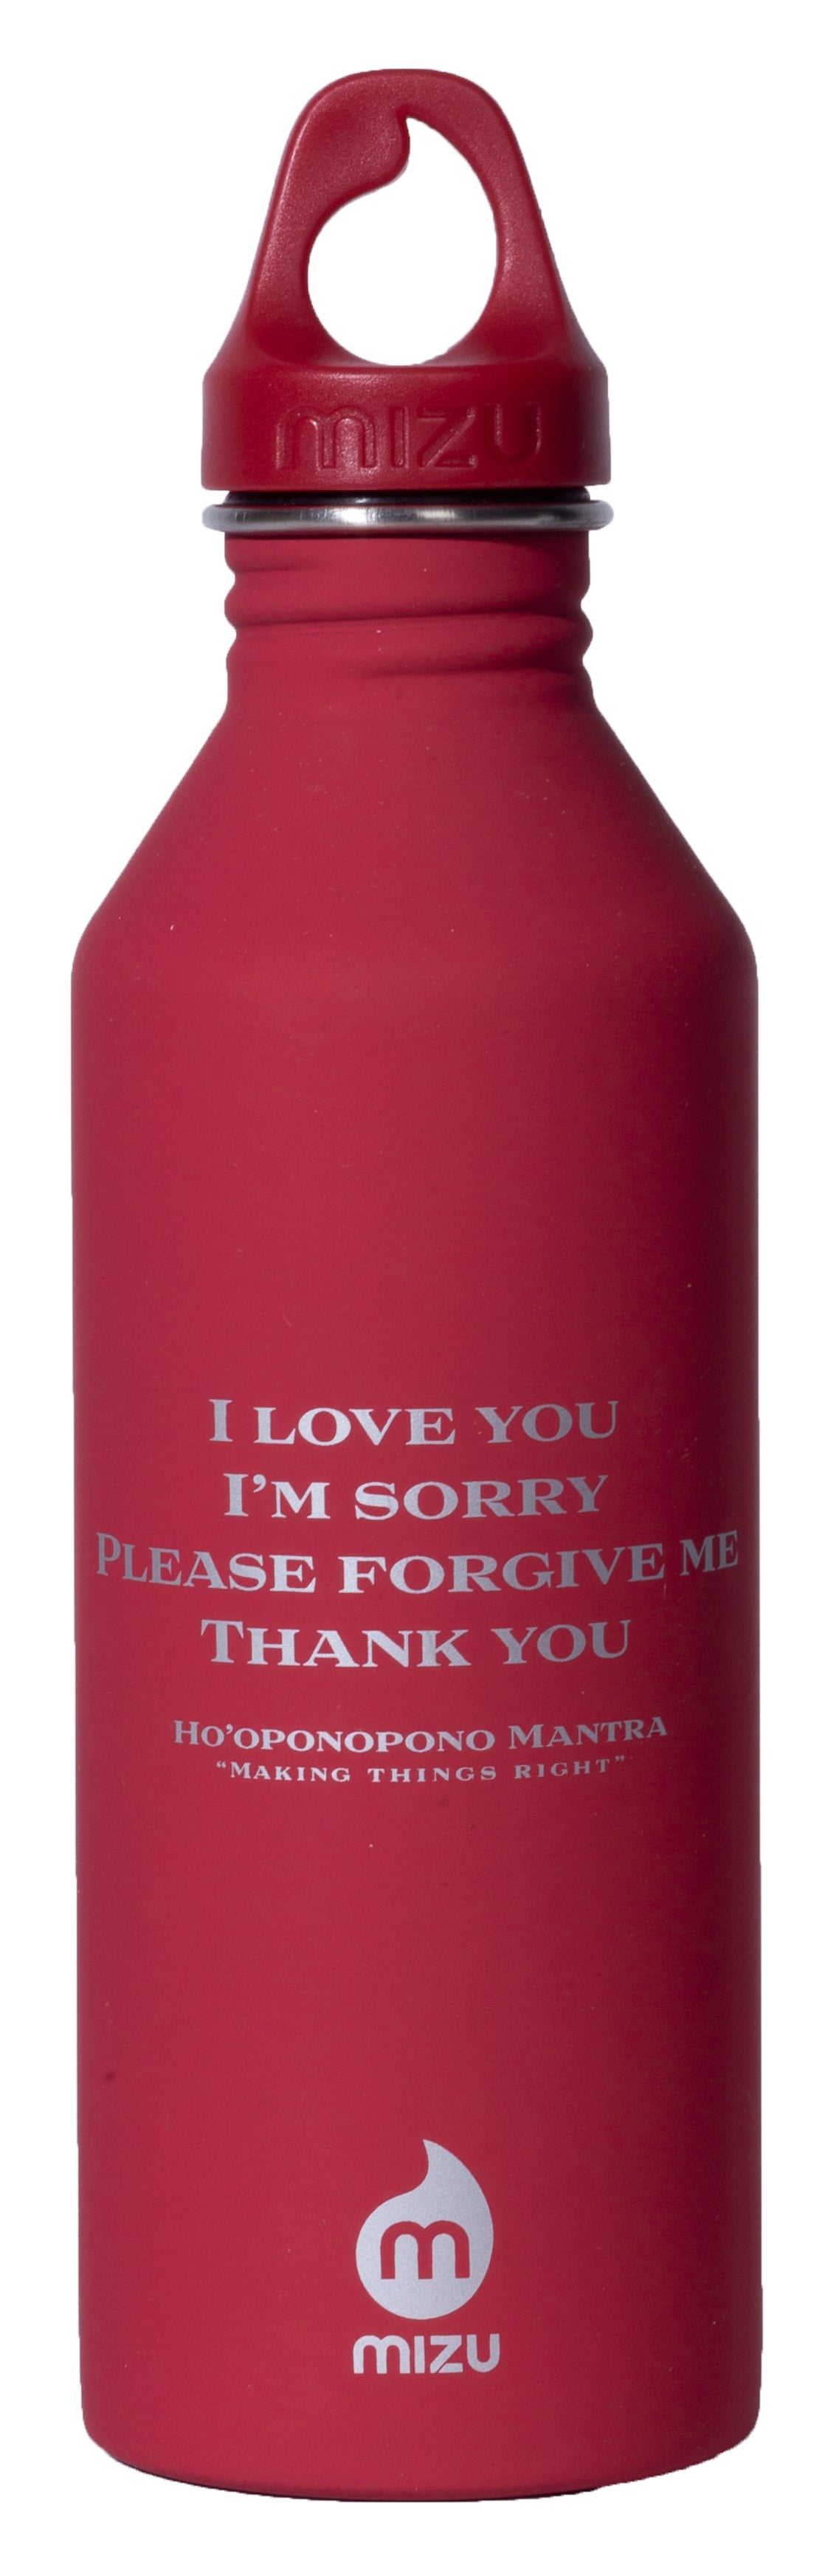 MIRARI® // Divine Warrior® Collection Water Bottle Red with Silver Label